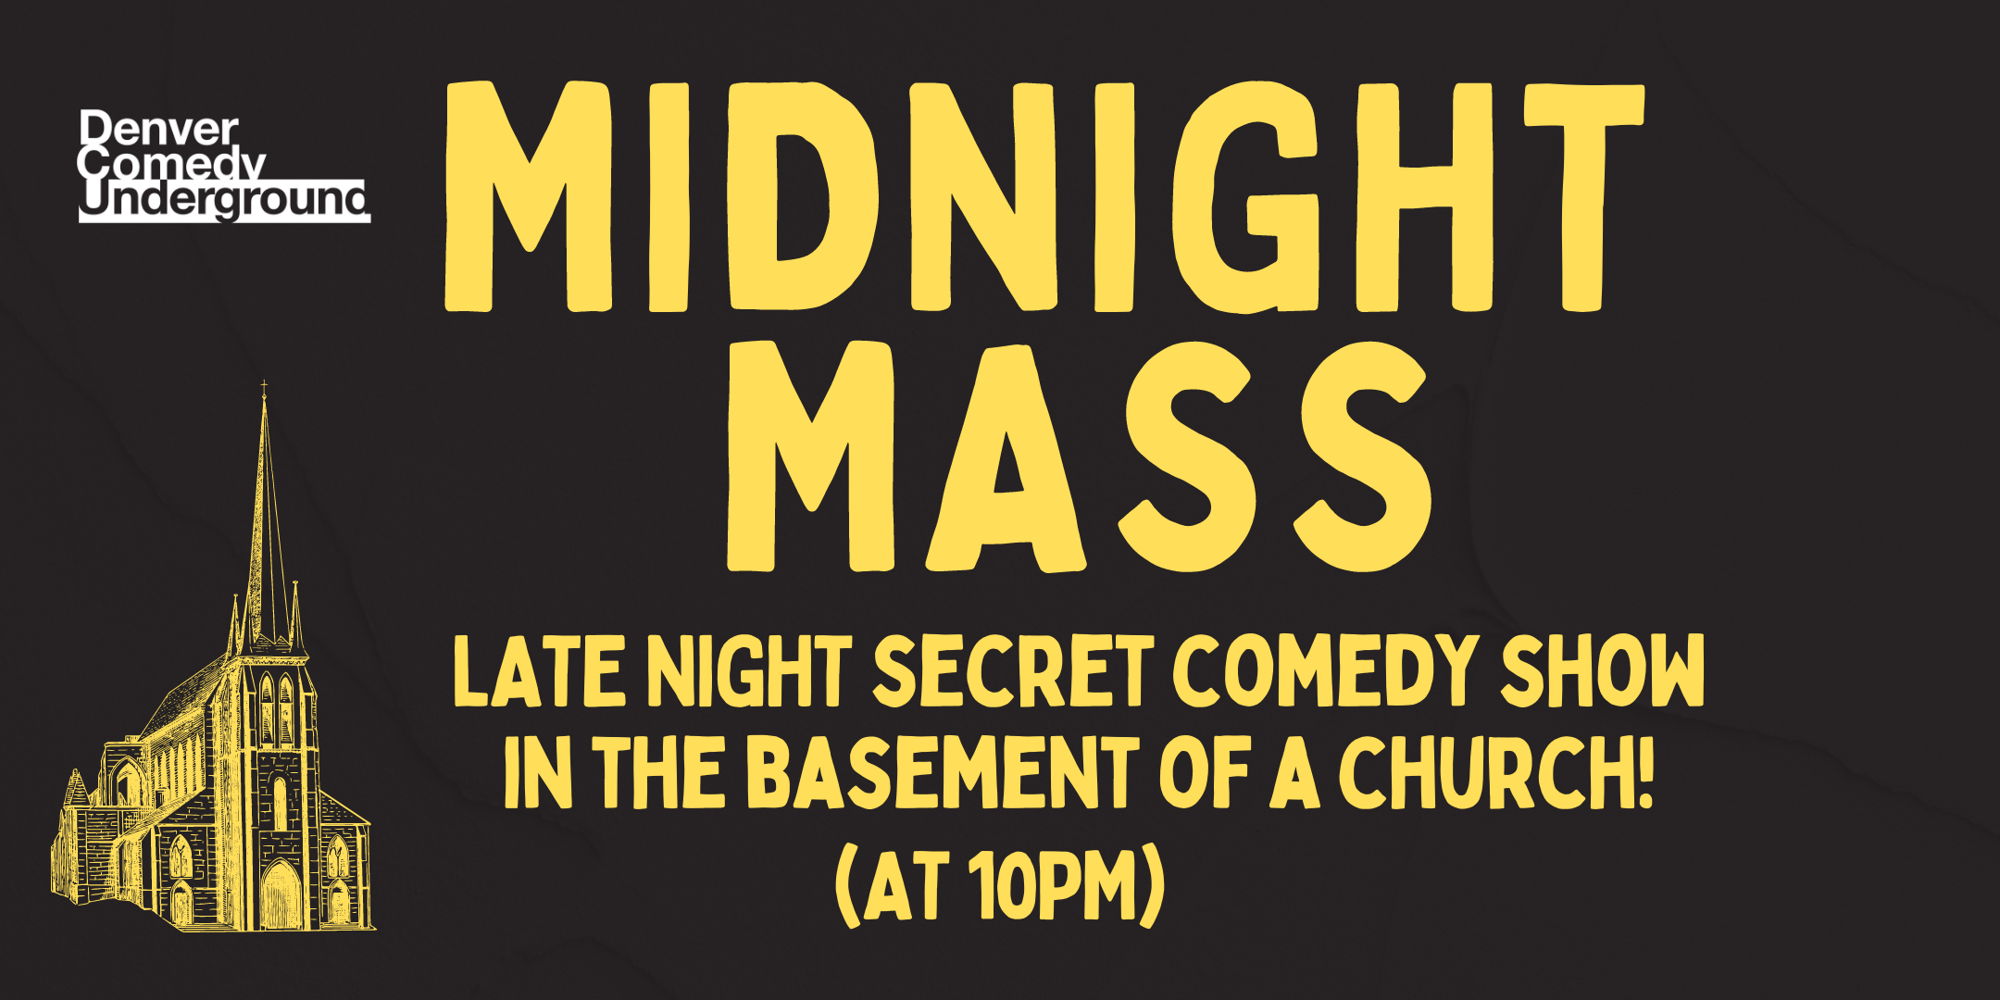 Midnight Mass: Secret Late Night Comedy in the Basement of a Church promotional image